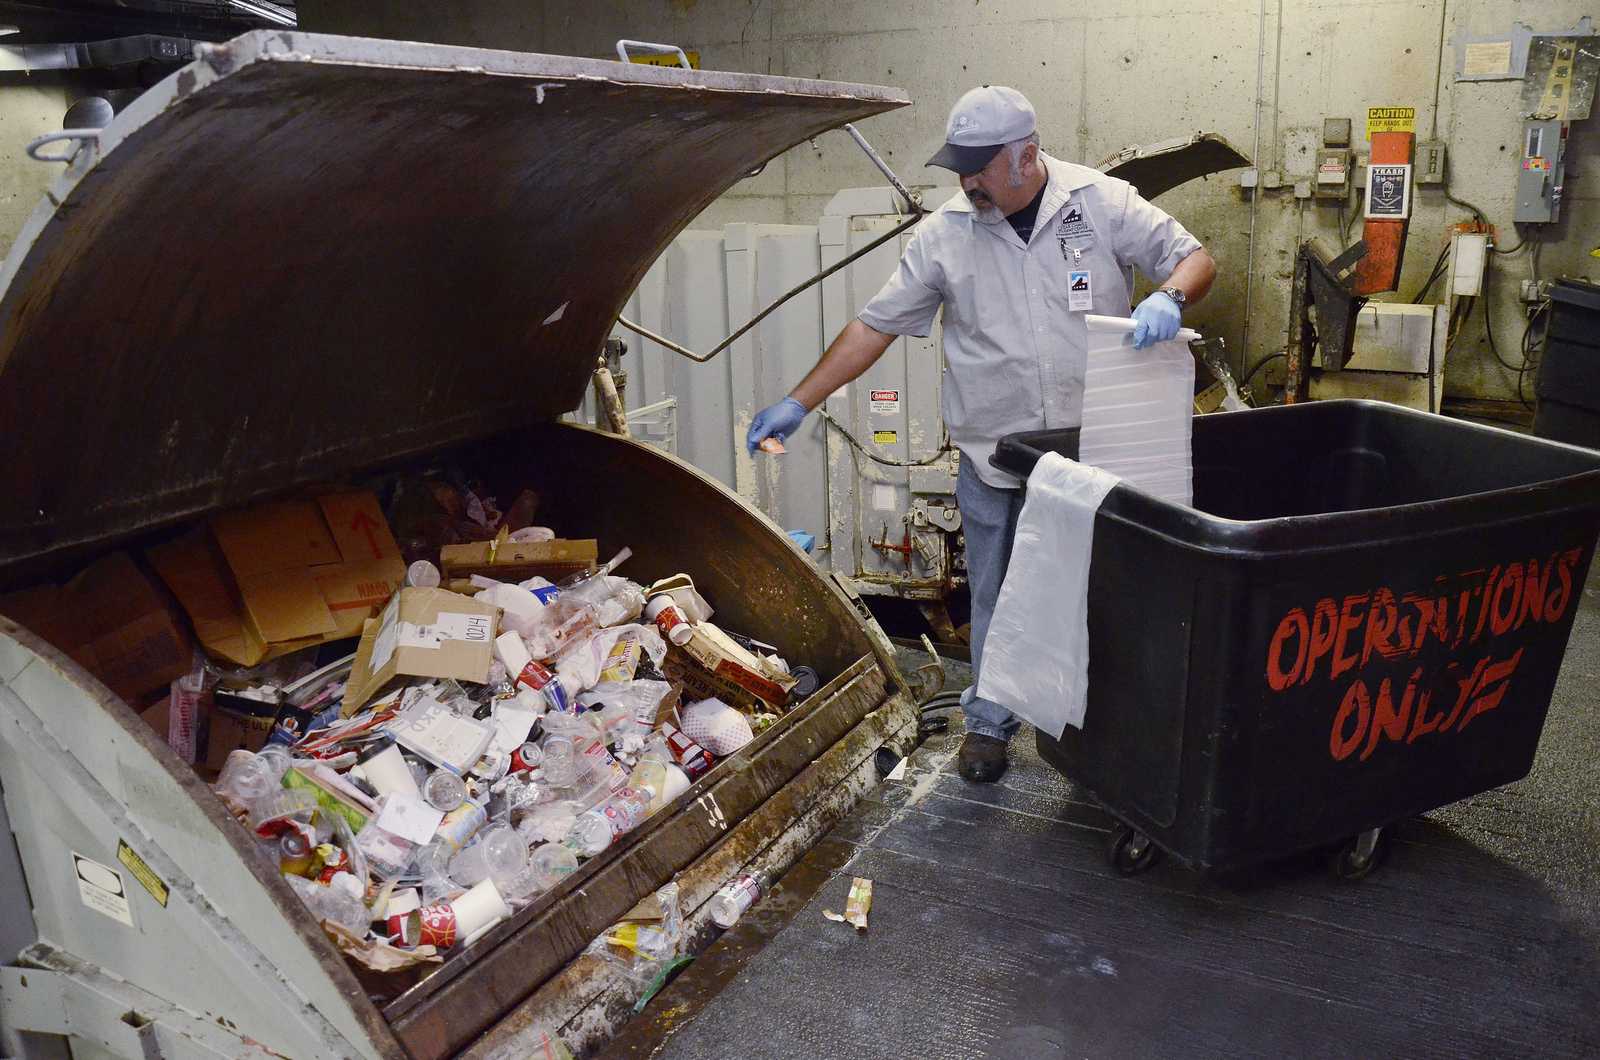 Agustin Cazares, who has been working at SF State for 33 years, empties the compost, recycling and waste beneath the Cesar Chavez Student Center in a zero waste effort on Tuesday, Sept. 3, 2013. Photo by Virginia Tieman / Xpress